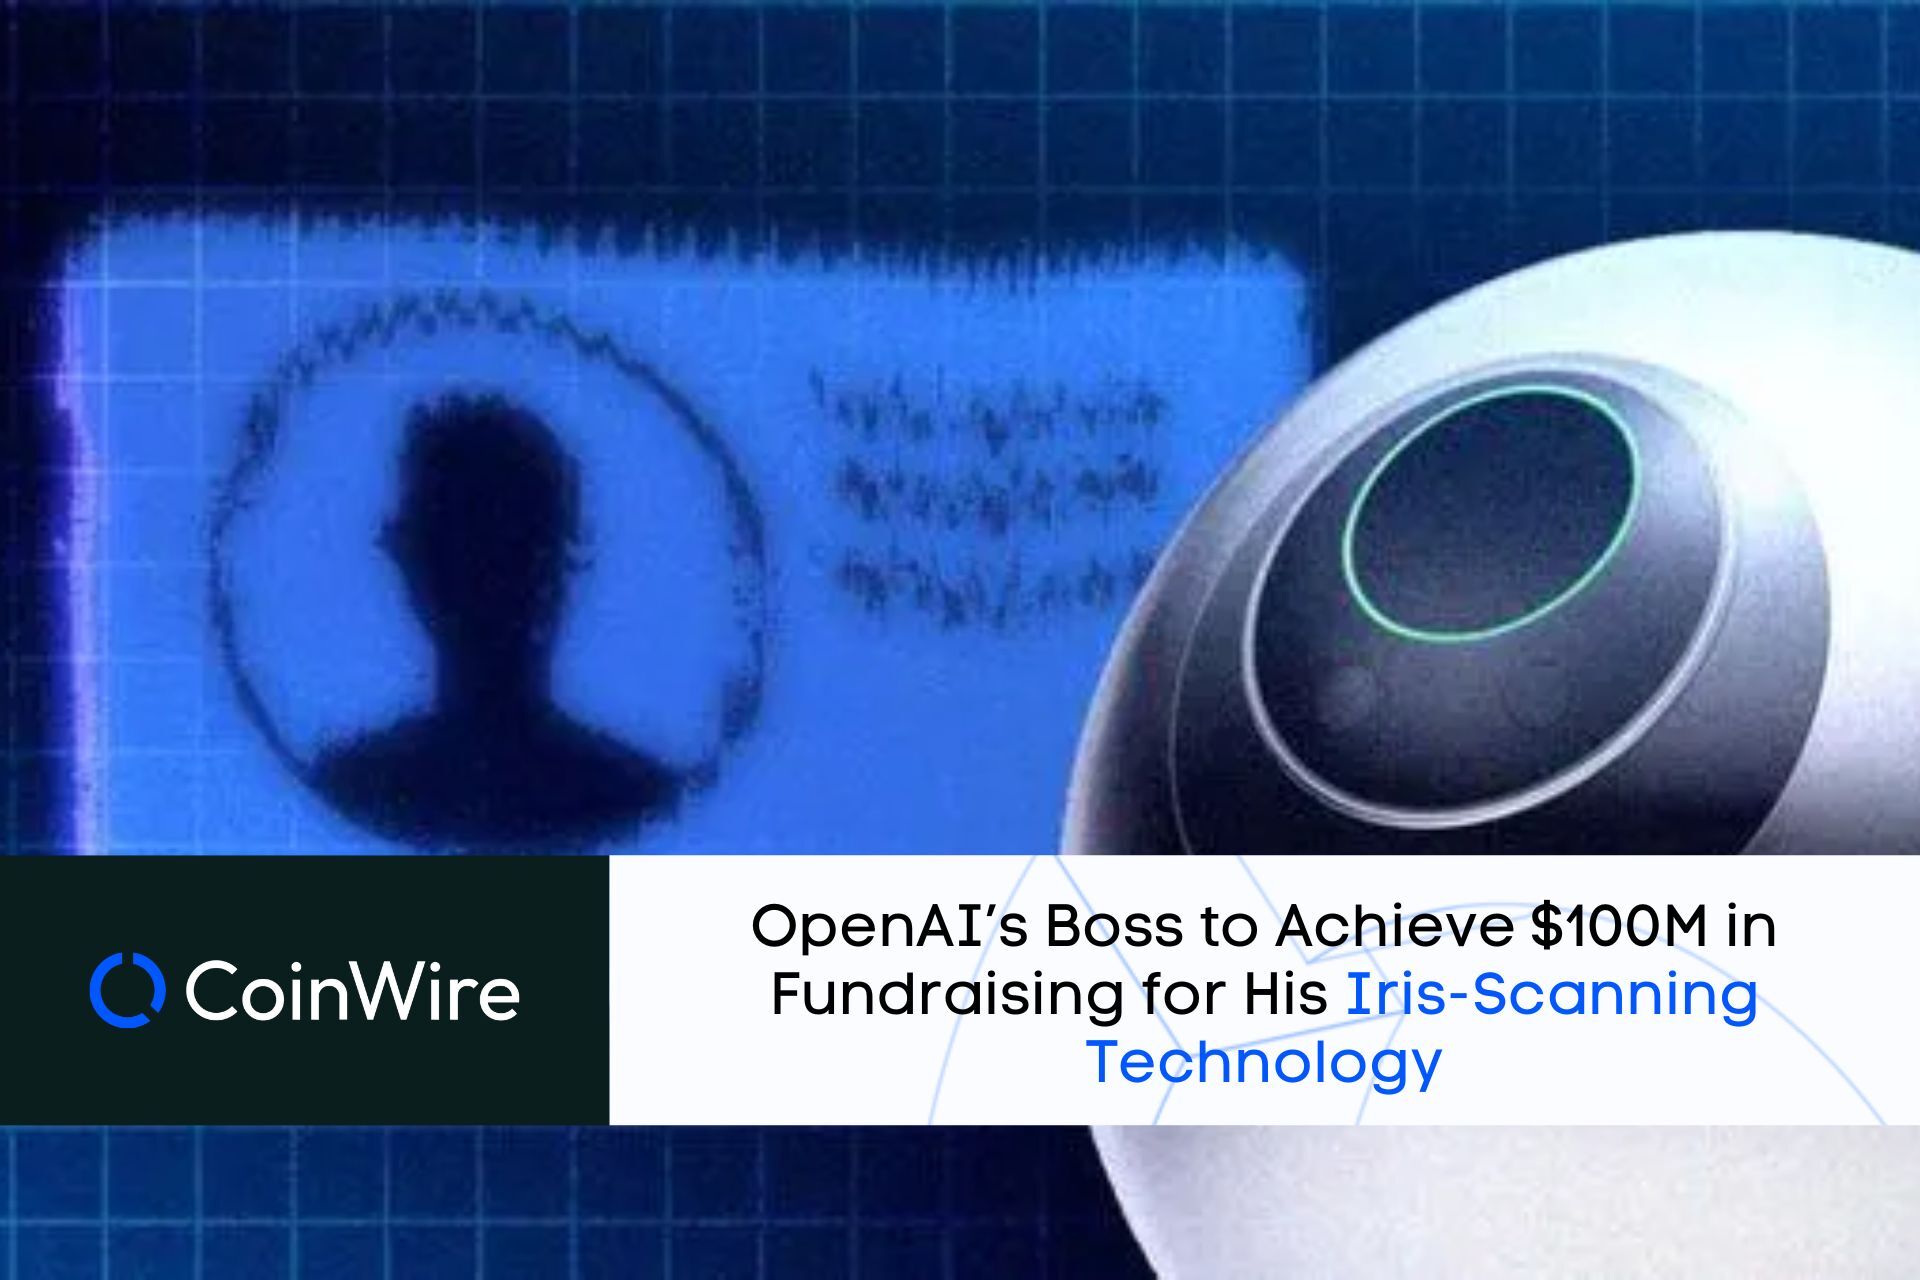 Openai’s Boss To Achieve $100M In Fundraising For His Iris-Scanning Technology